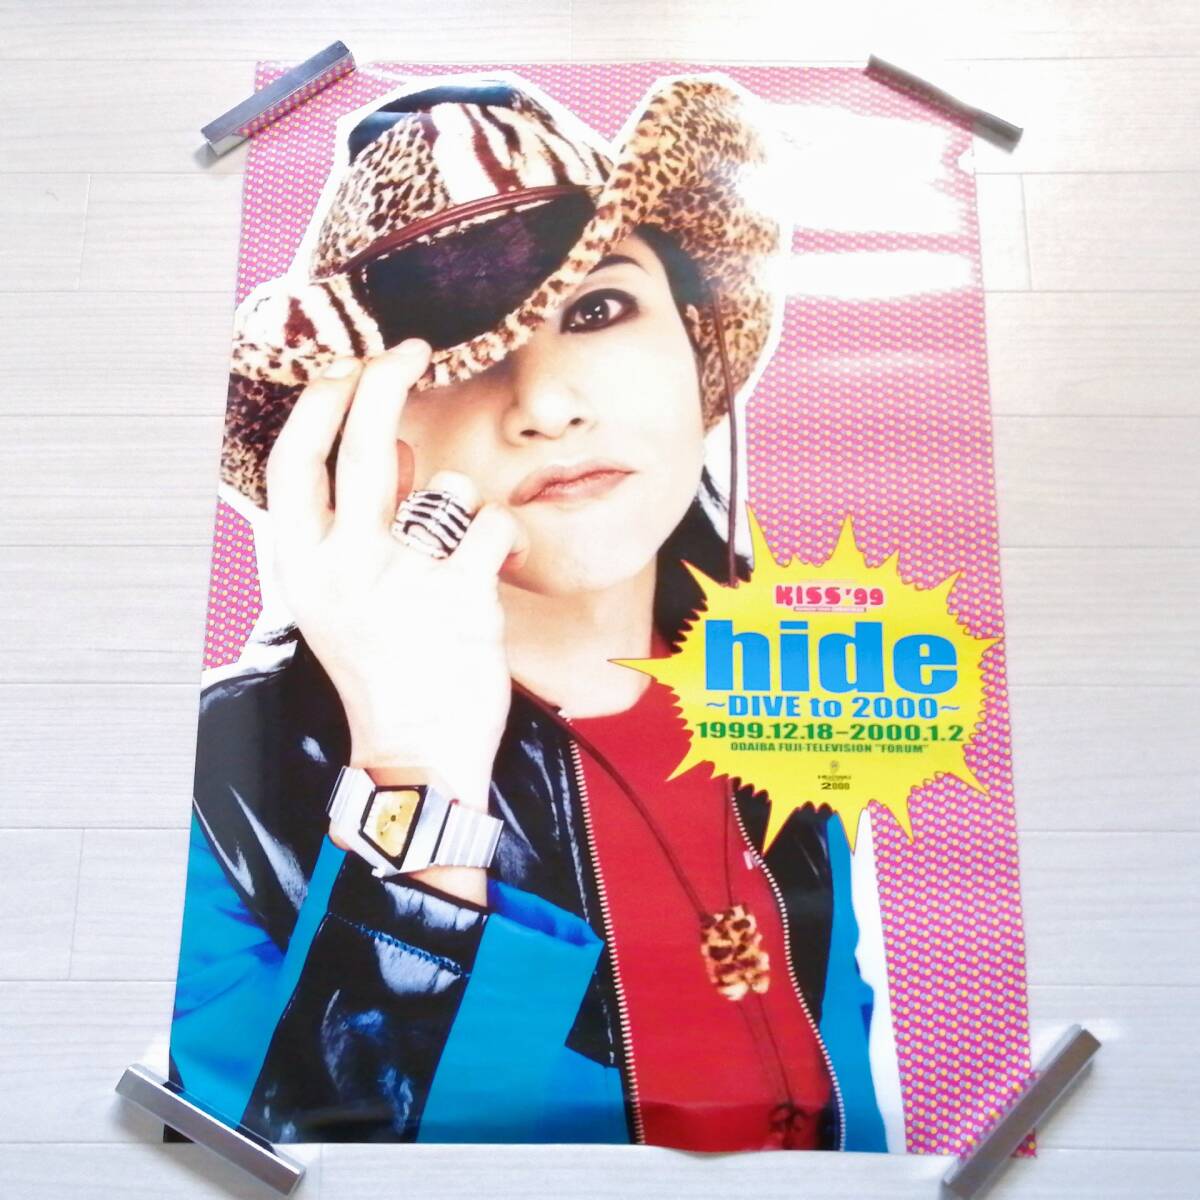 hide E④ ポスター DIVE to 2000～ KISS'99 X JAPAN 美品 グッズ_画像1